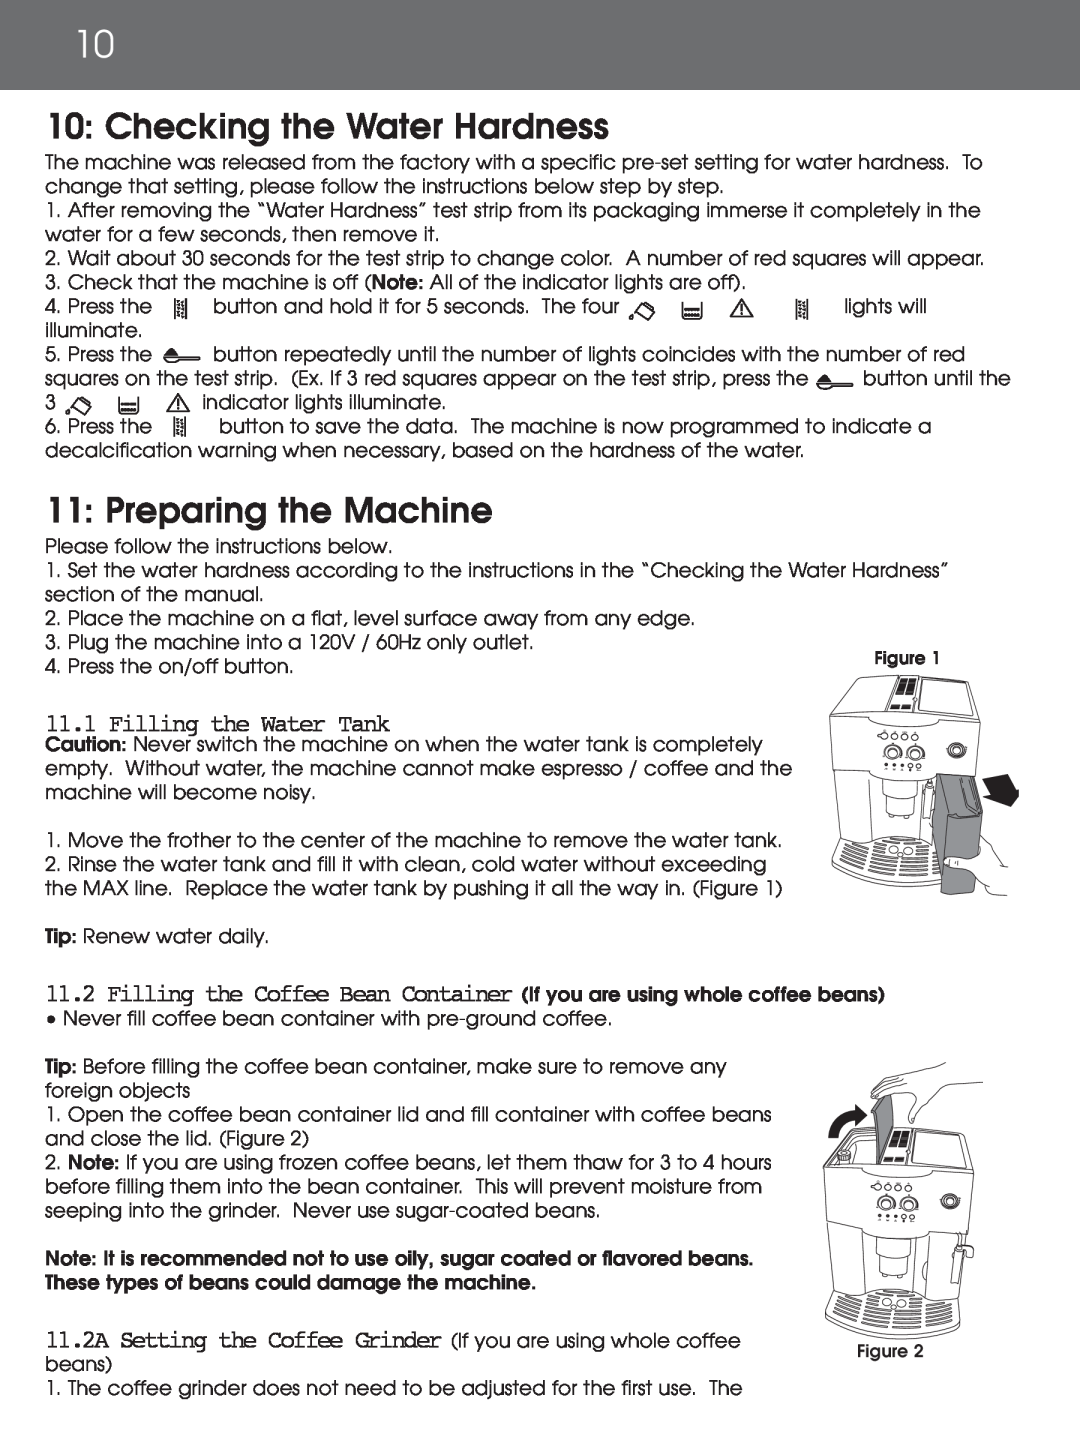 DeLonghi EAM4000 instruction manual 10: Checking the Water Hardness, 11: Preparing the Machine, Filling the Water Tank 